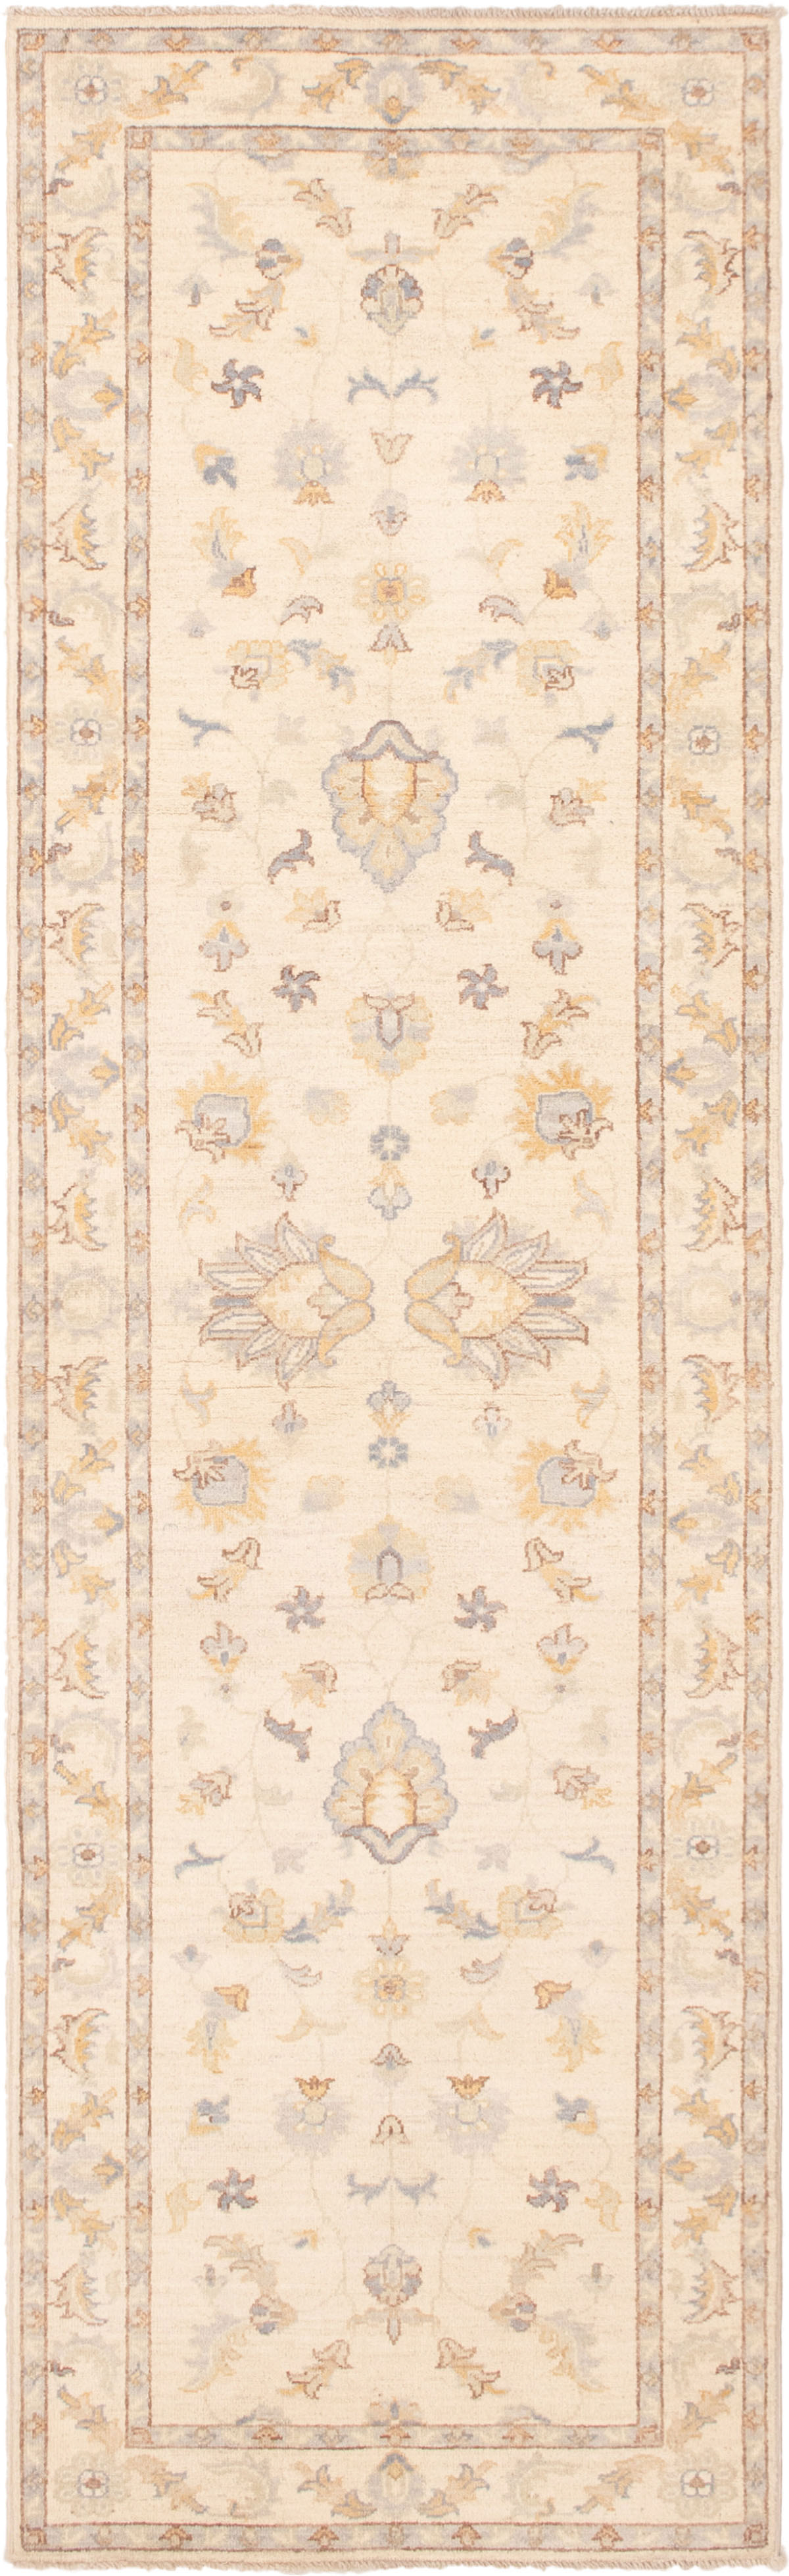 Hand-knotted Peshawar Finest Cream Wool Rug 2'9" x 9'6" Size: 2'9" x 9'6"  